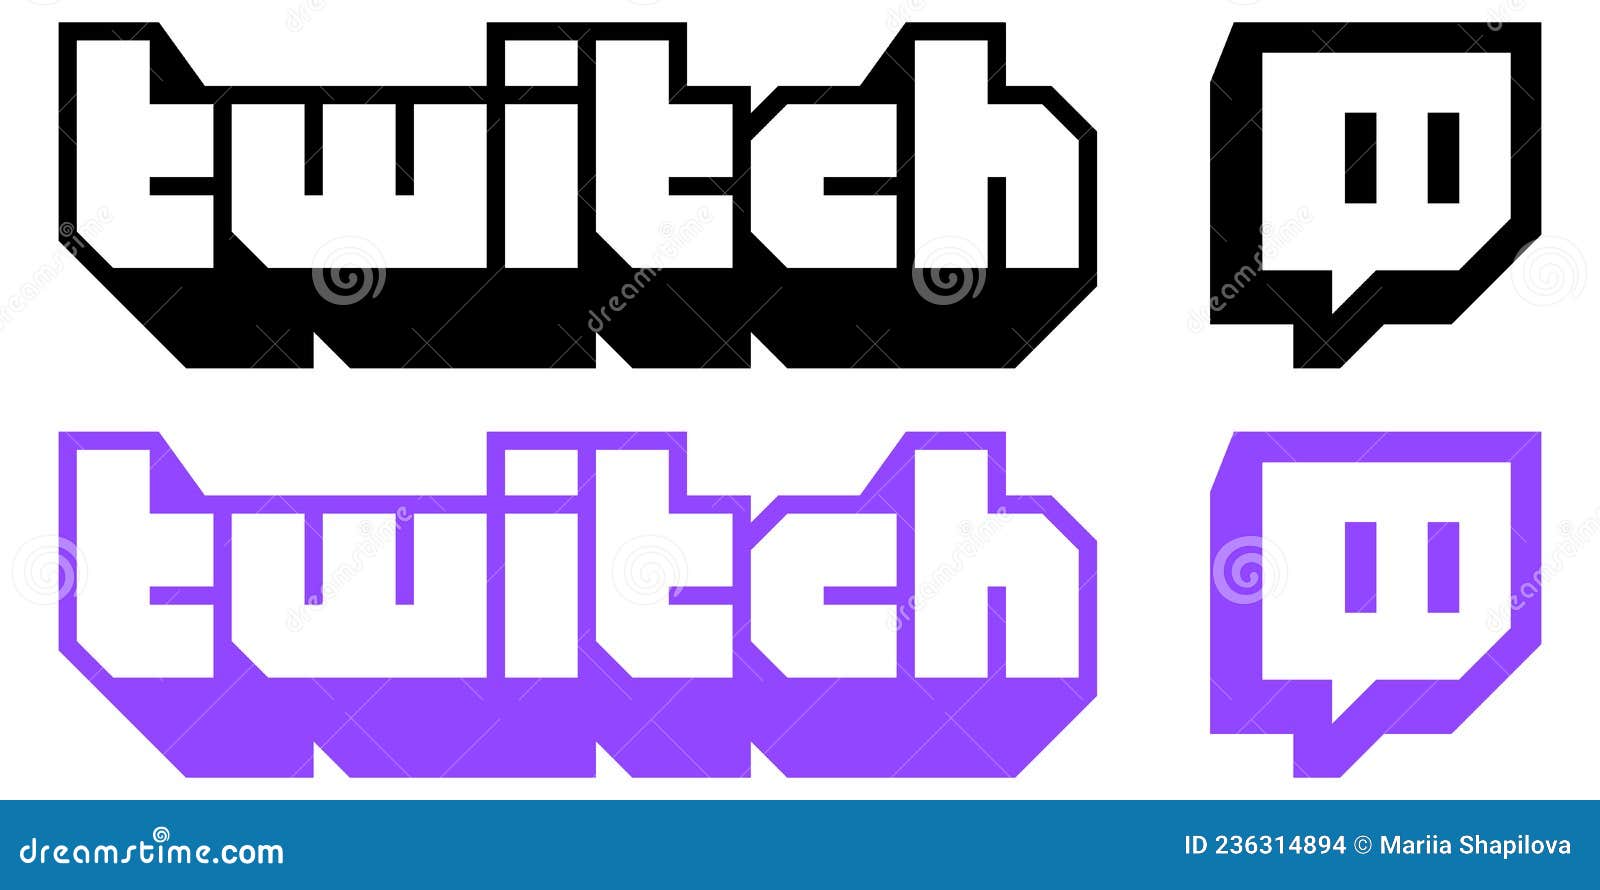 Twitch Logo PNG Vectors Free Download